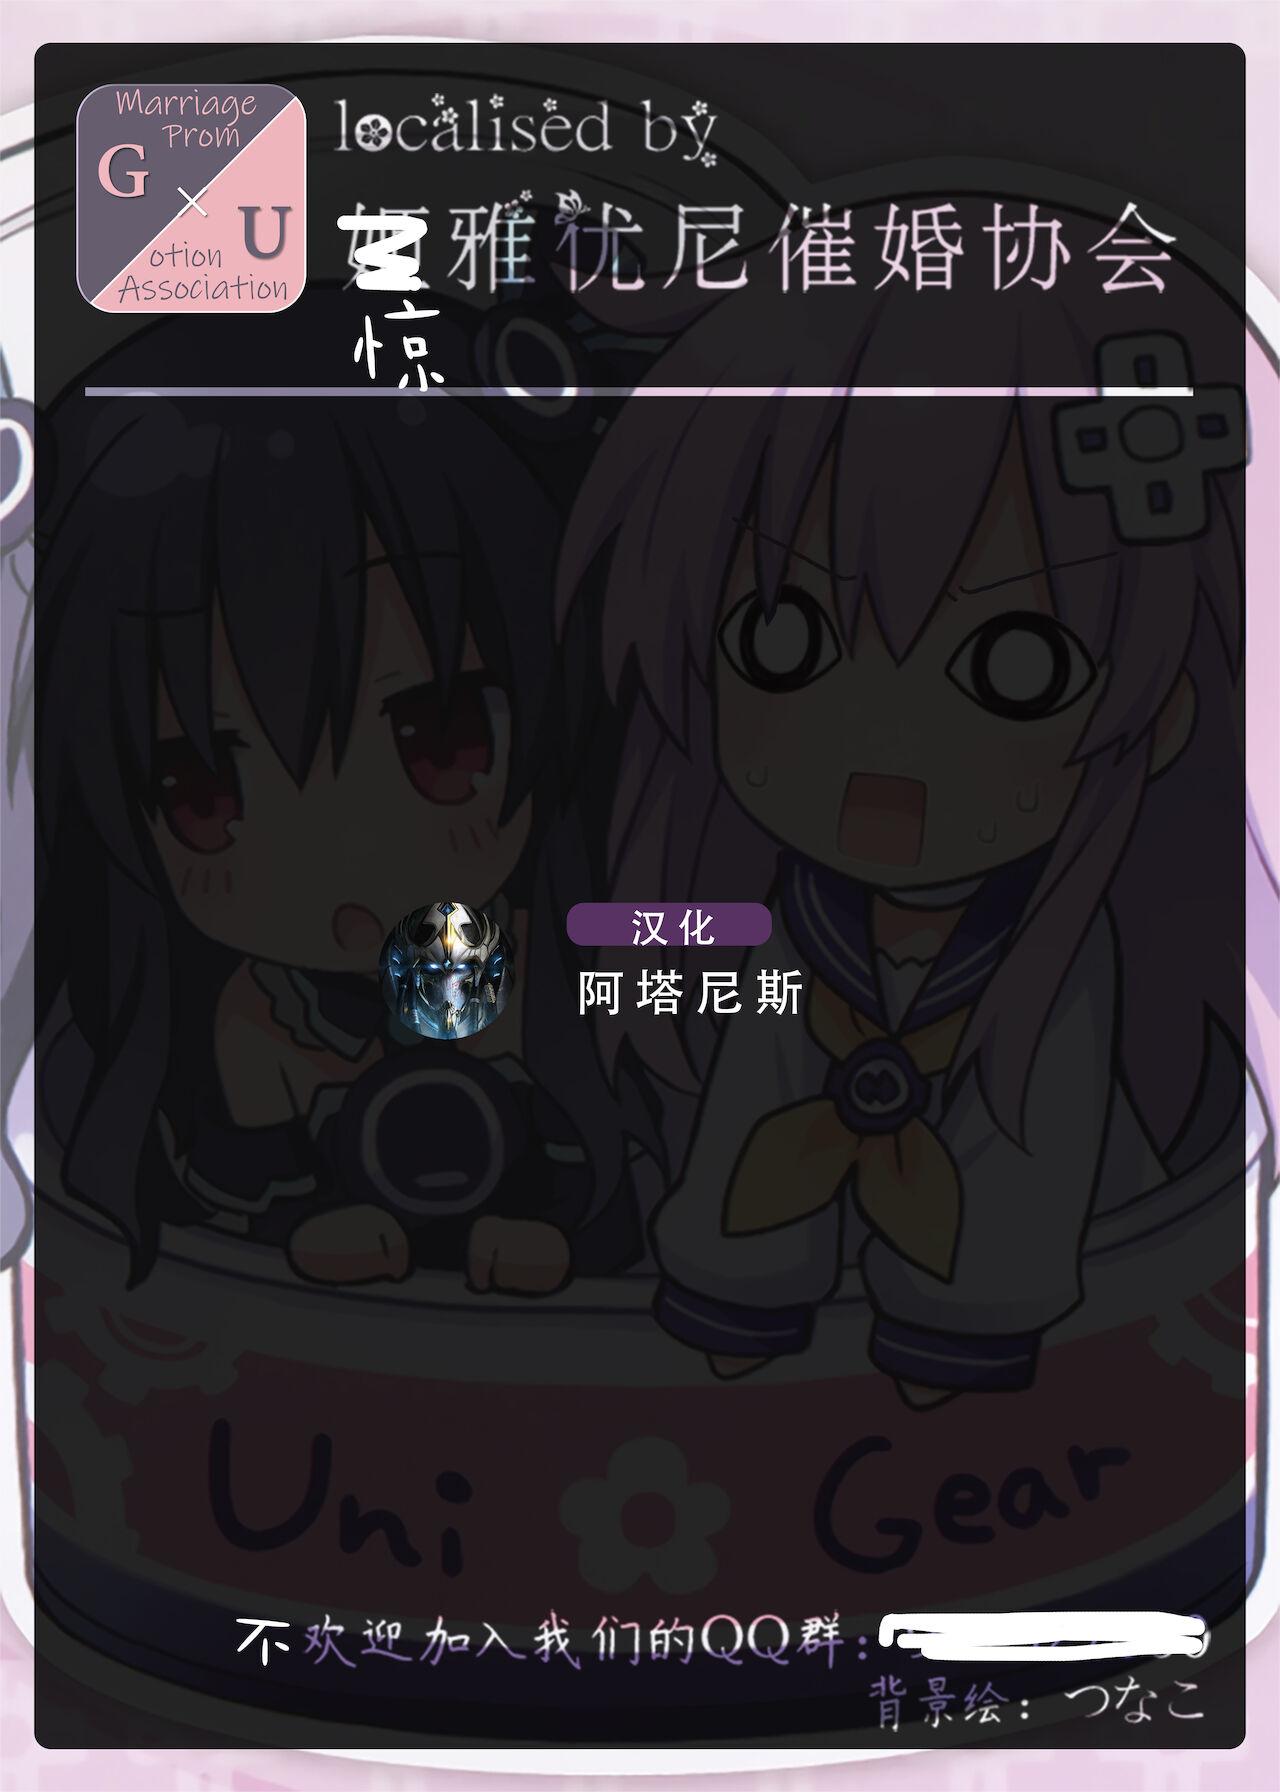 A certain Nepgear was harmed in the making of this doujinshi 18